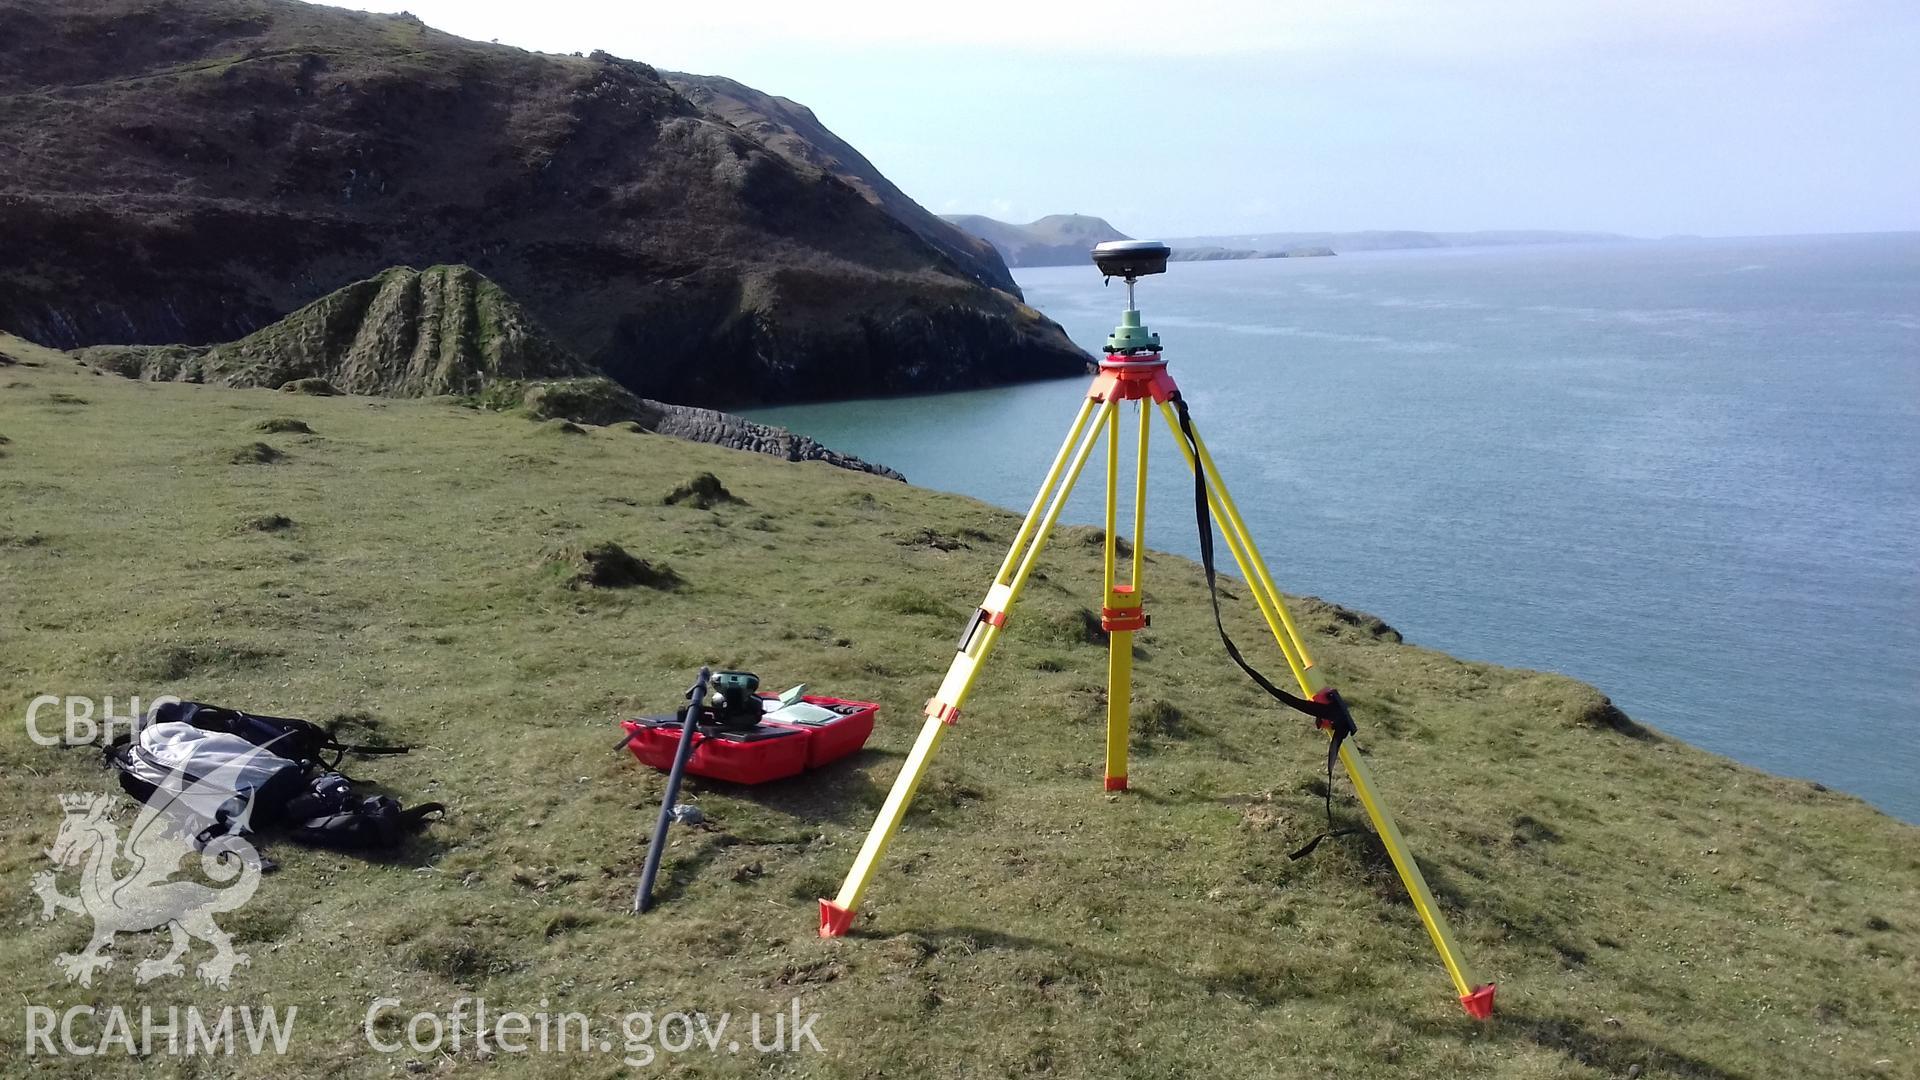 GNSS equipment. Camera facing W. From photographic survey of Castell Bach (NPRN 93914) by Dr Toby Driver for site monitoring 27/03/2019.
Produced with EU funds through the Ireland Wales Co-operation Programme 2014-2020. All material made freely available through the Open Government Licence.